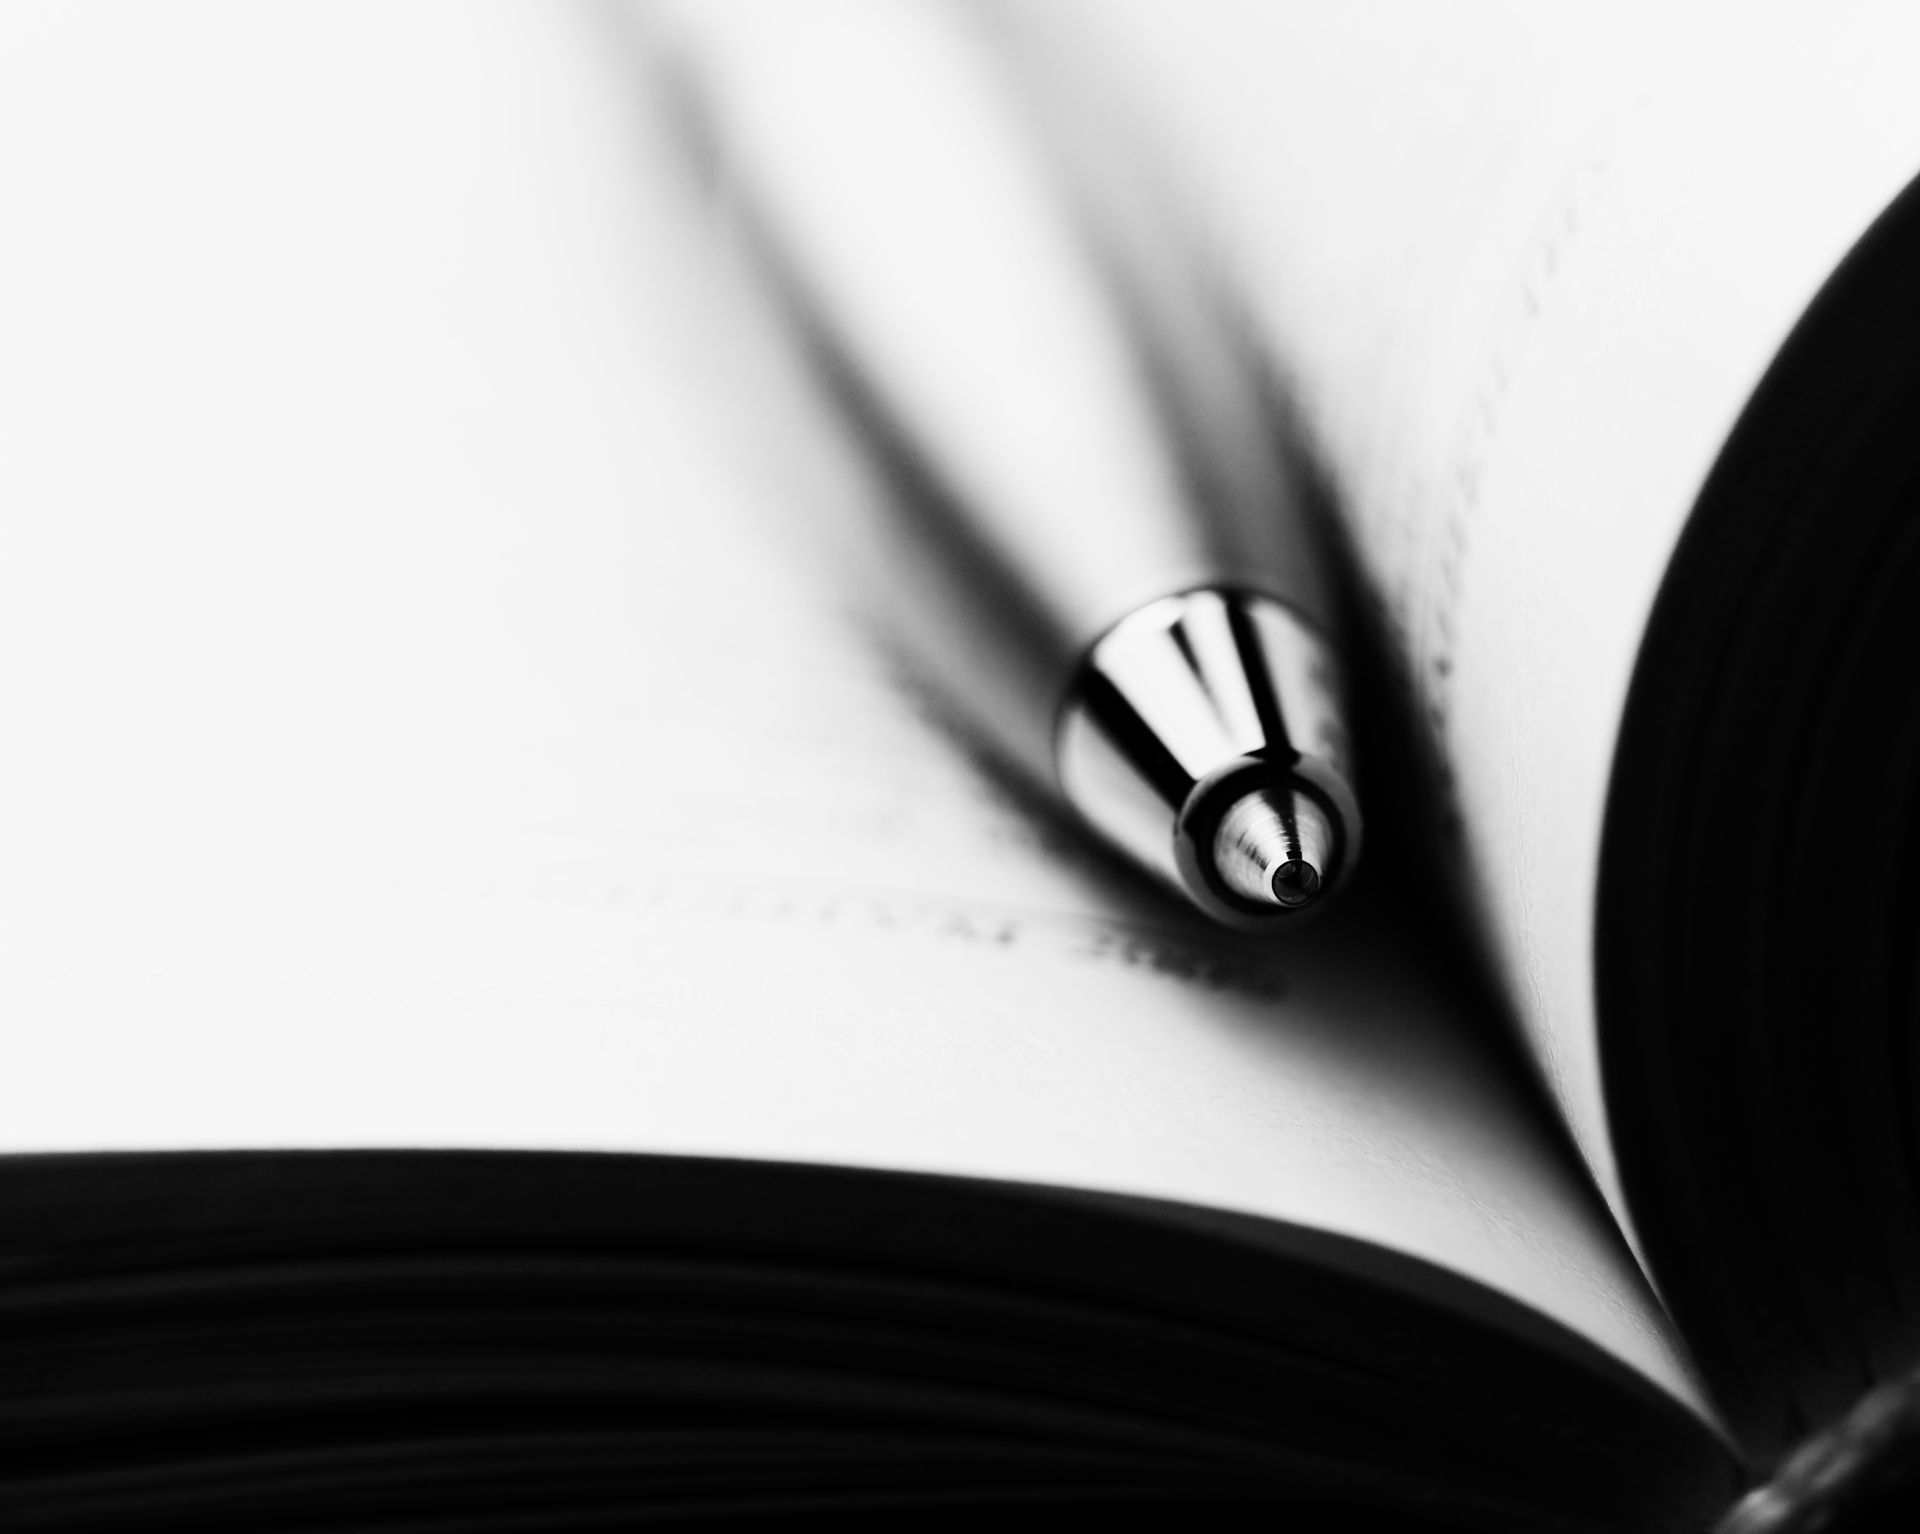 Close Up Photo of a Pen on a Book